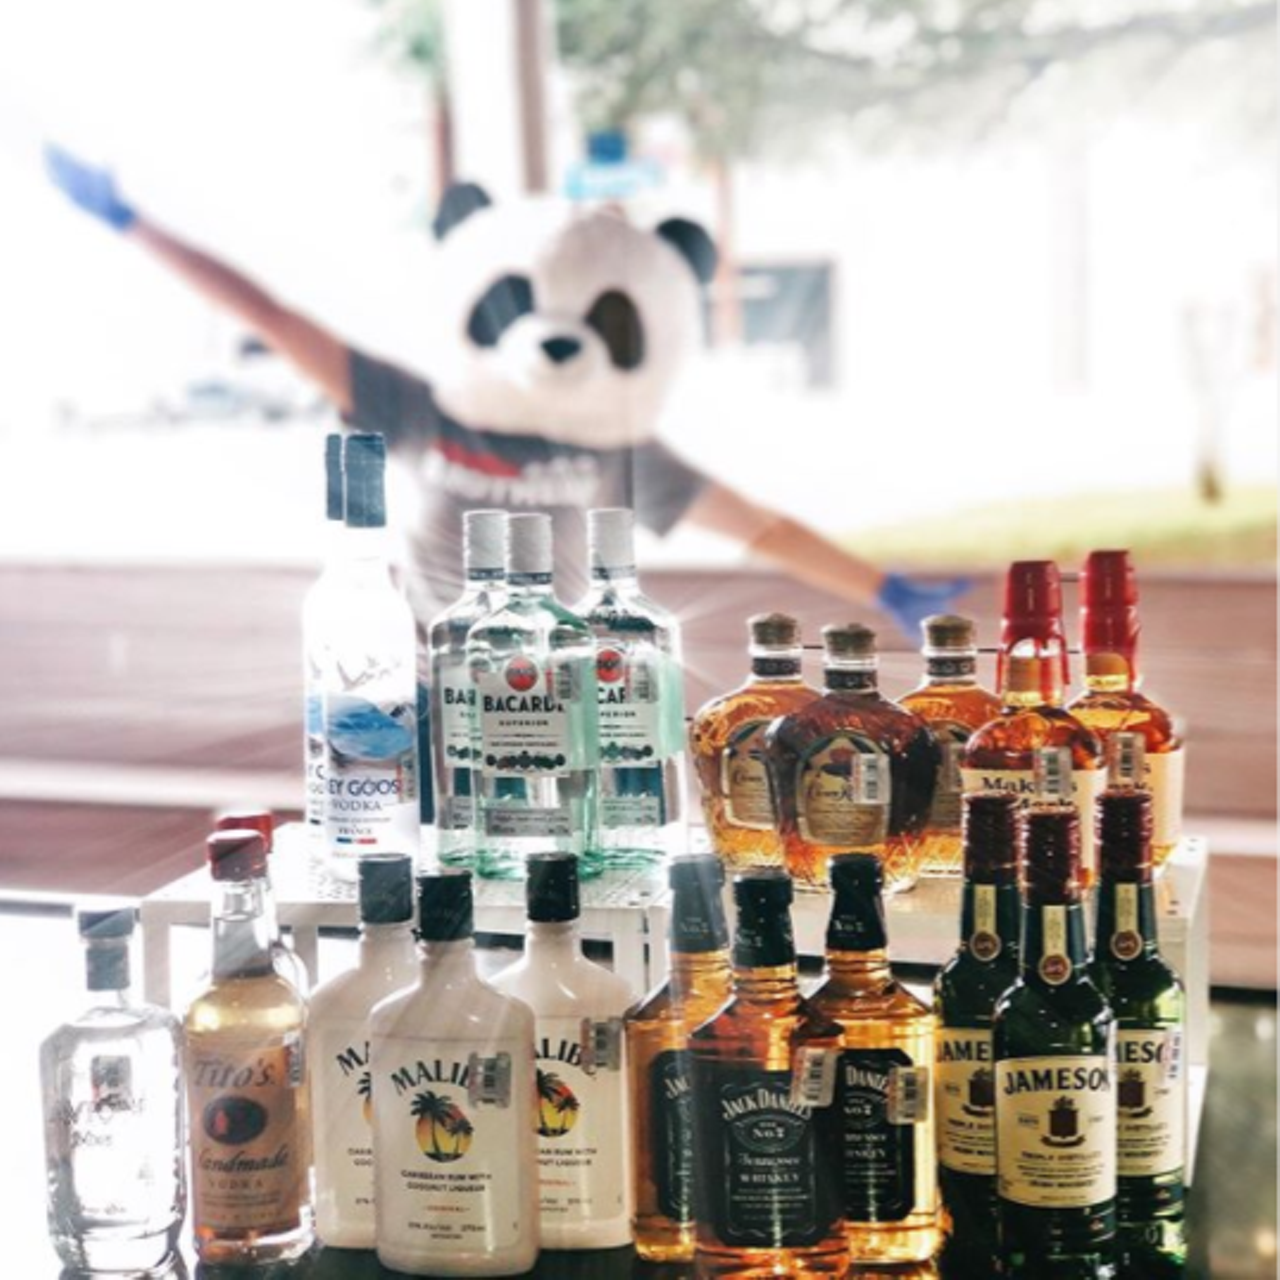 Bamboo
1010 S Flores St., Suite 111, (210)-481-4884, bambooeats.com
For $25, you can get a small bottle of your liquor of choice plus two mixers and a garnish from Bamboo, available delivery and curbside pickup.  
Photo via Instagram / bambooeats